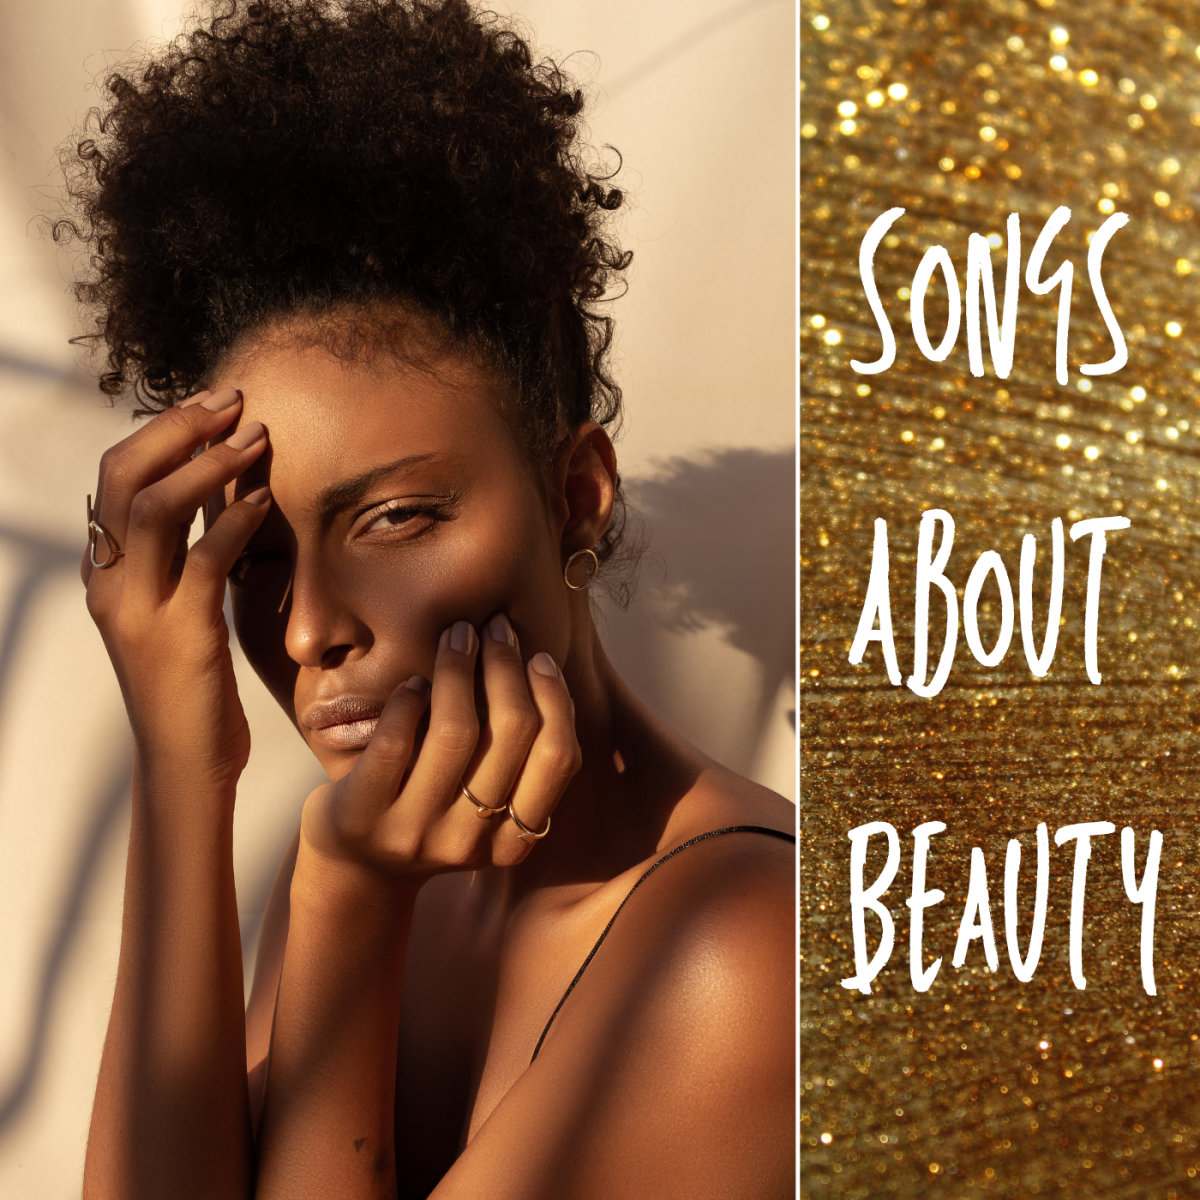 Boost your confidence and celebrate beauty inside and out with a playlist of pop, rock, country, and R&B songs.